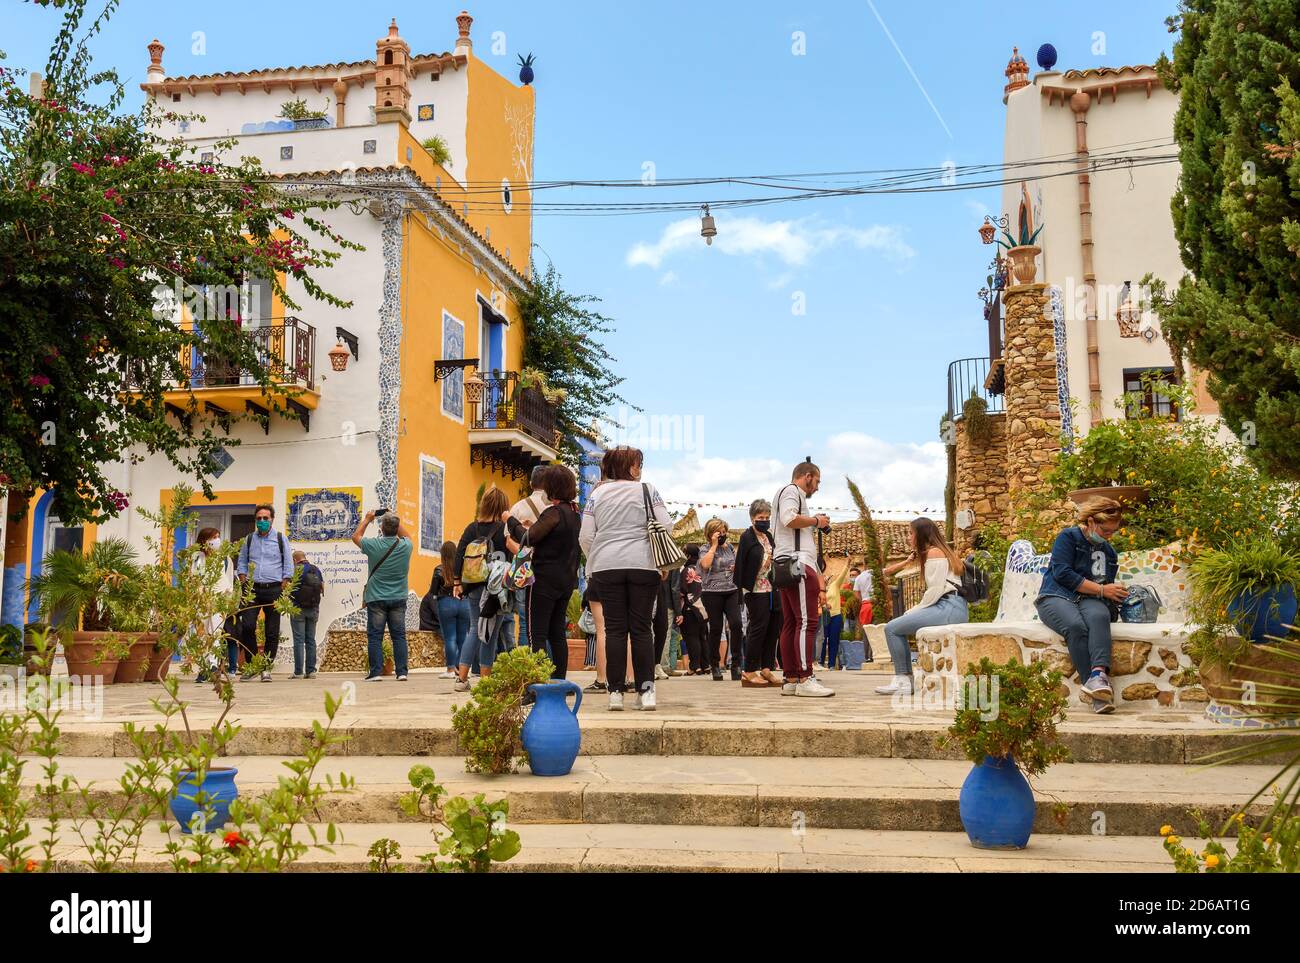 Parrini, Sicily, Italy - September 27, 2020: Tourists visiting the ancient village Parrini in the municipality of Partinico, province of Palermo Stock Photo